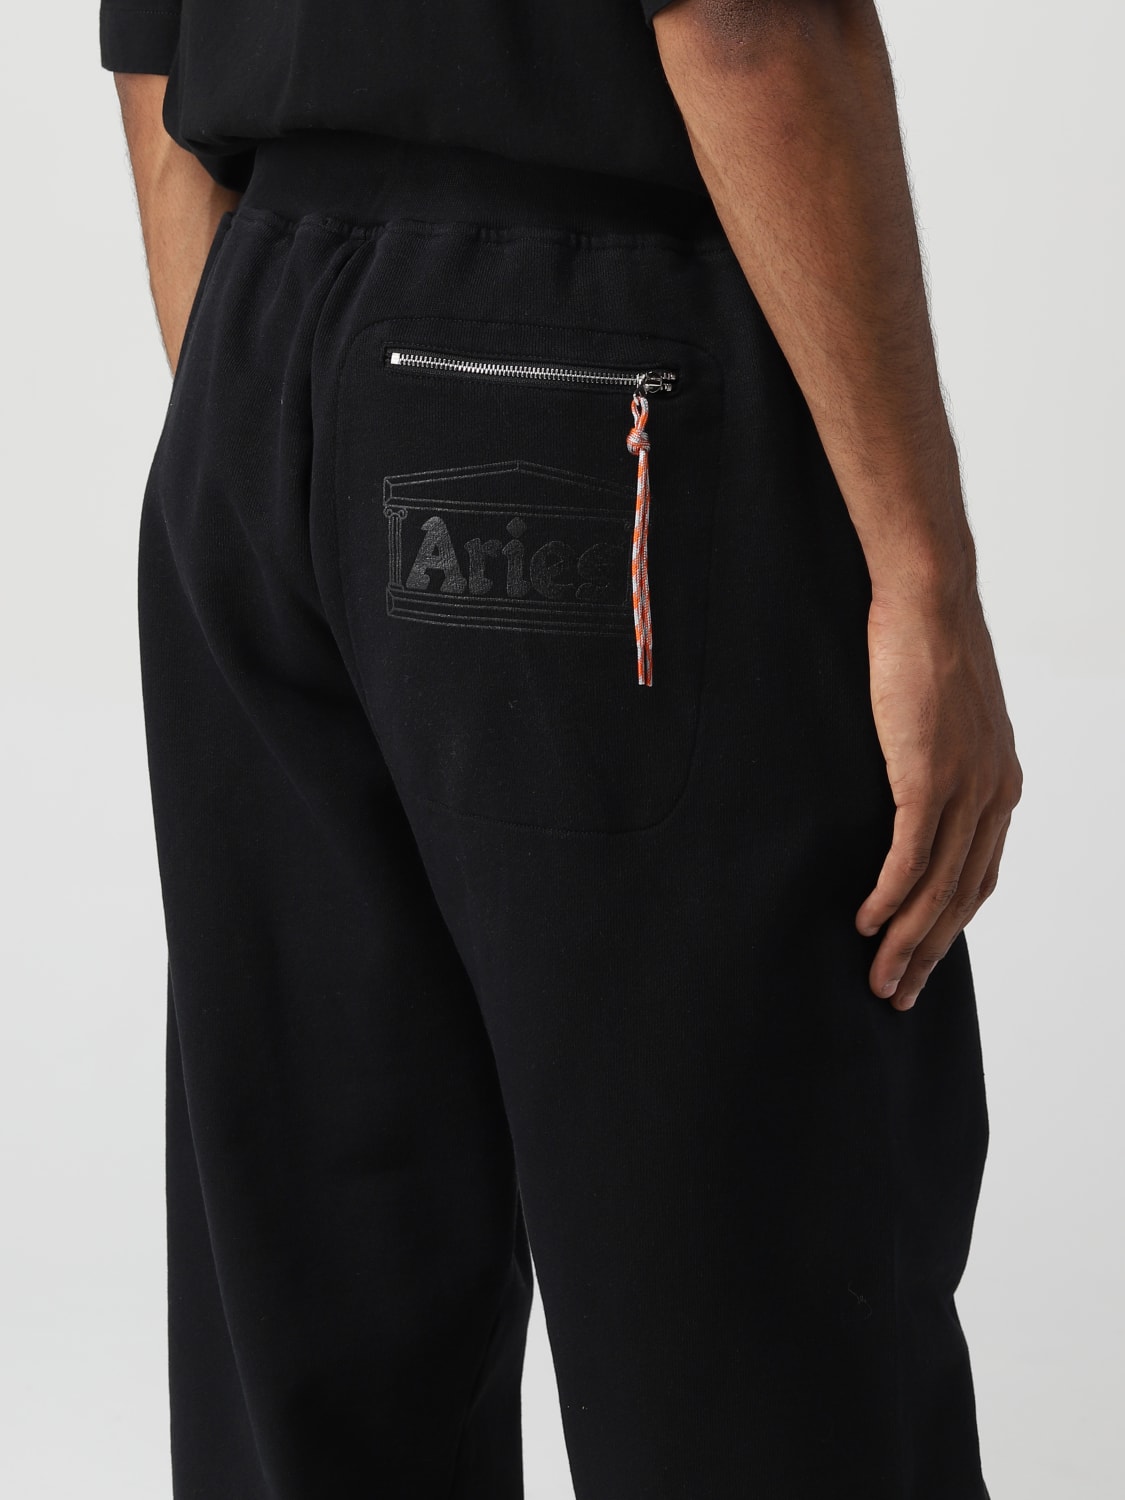 ARIES: pants for man - Black | Aries pants FTAR30000 online on GIGLIO.COM